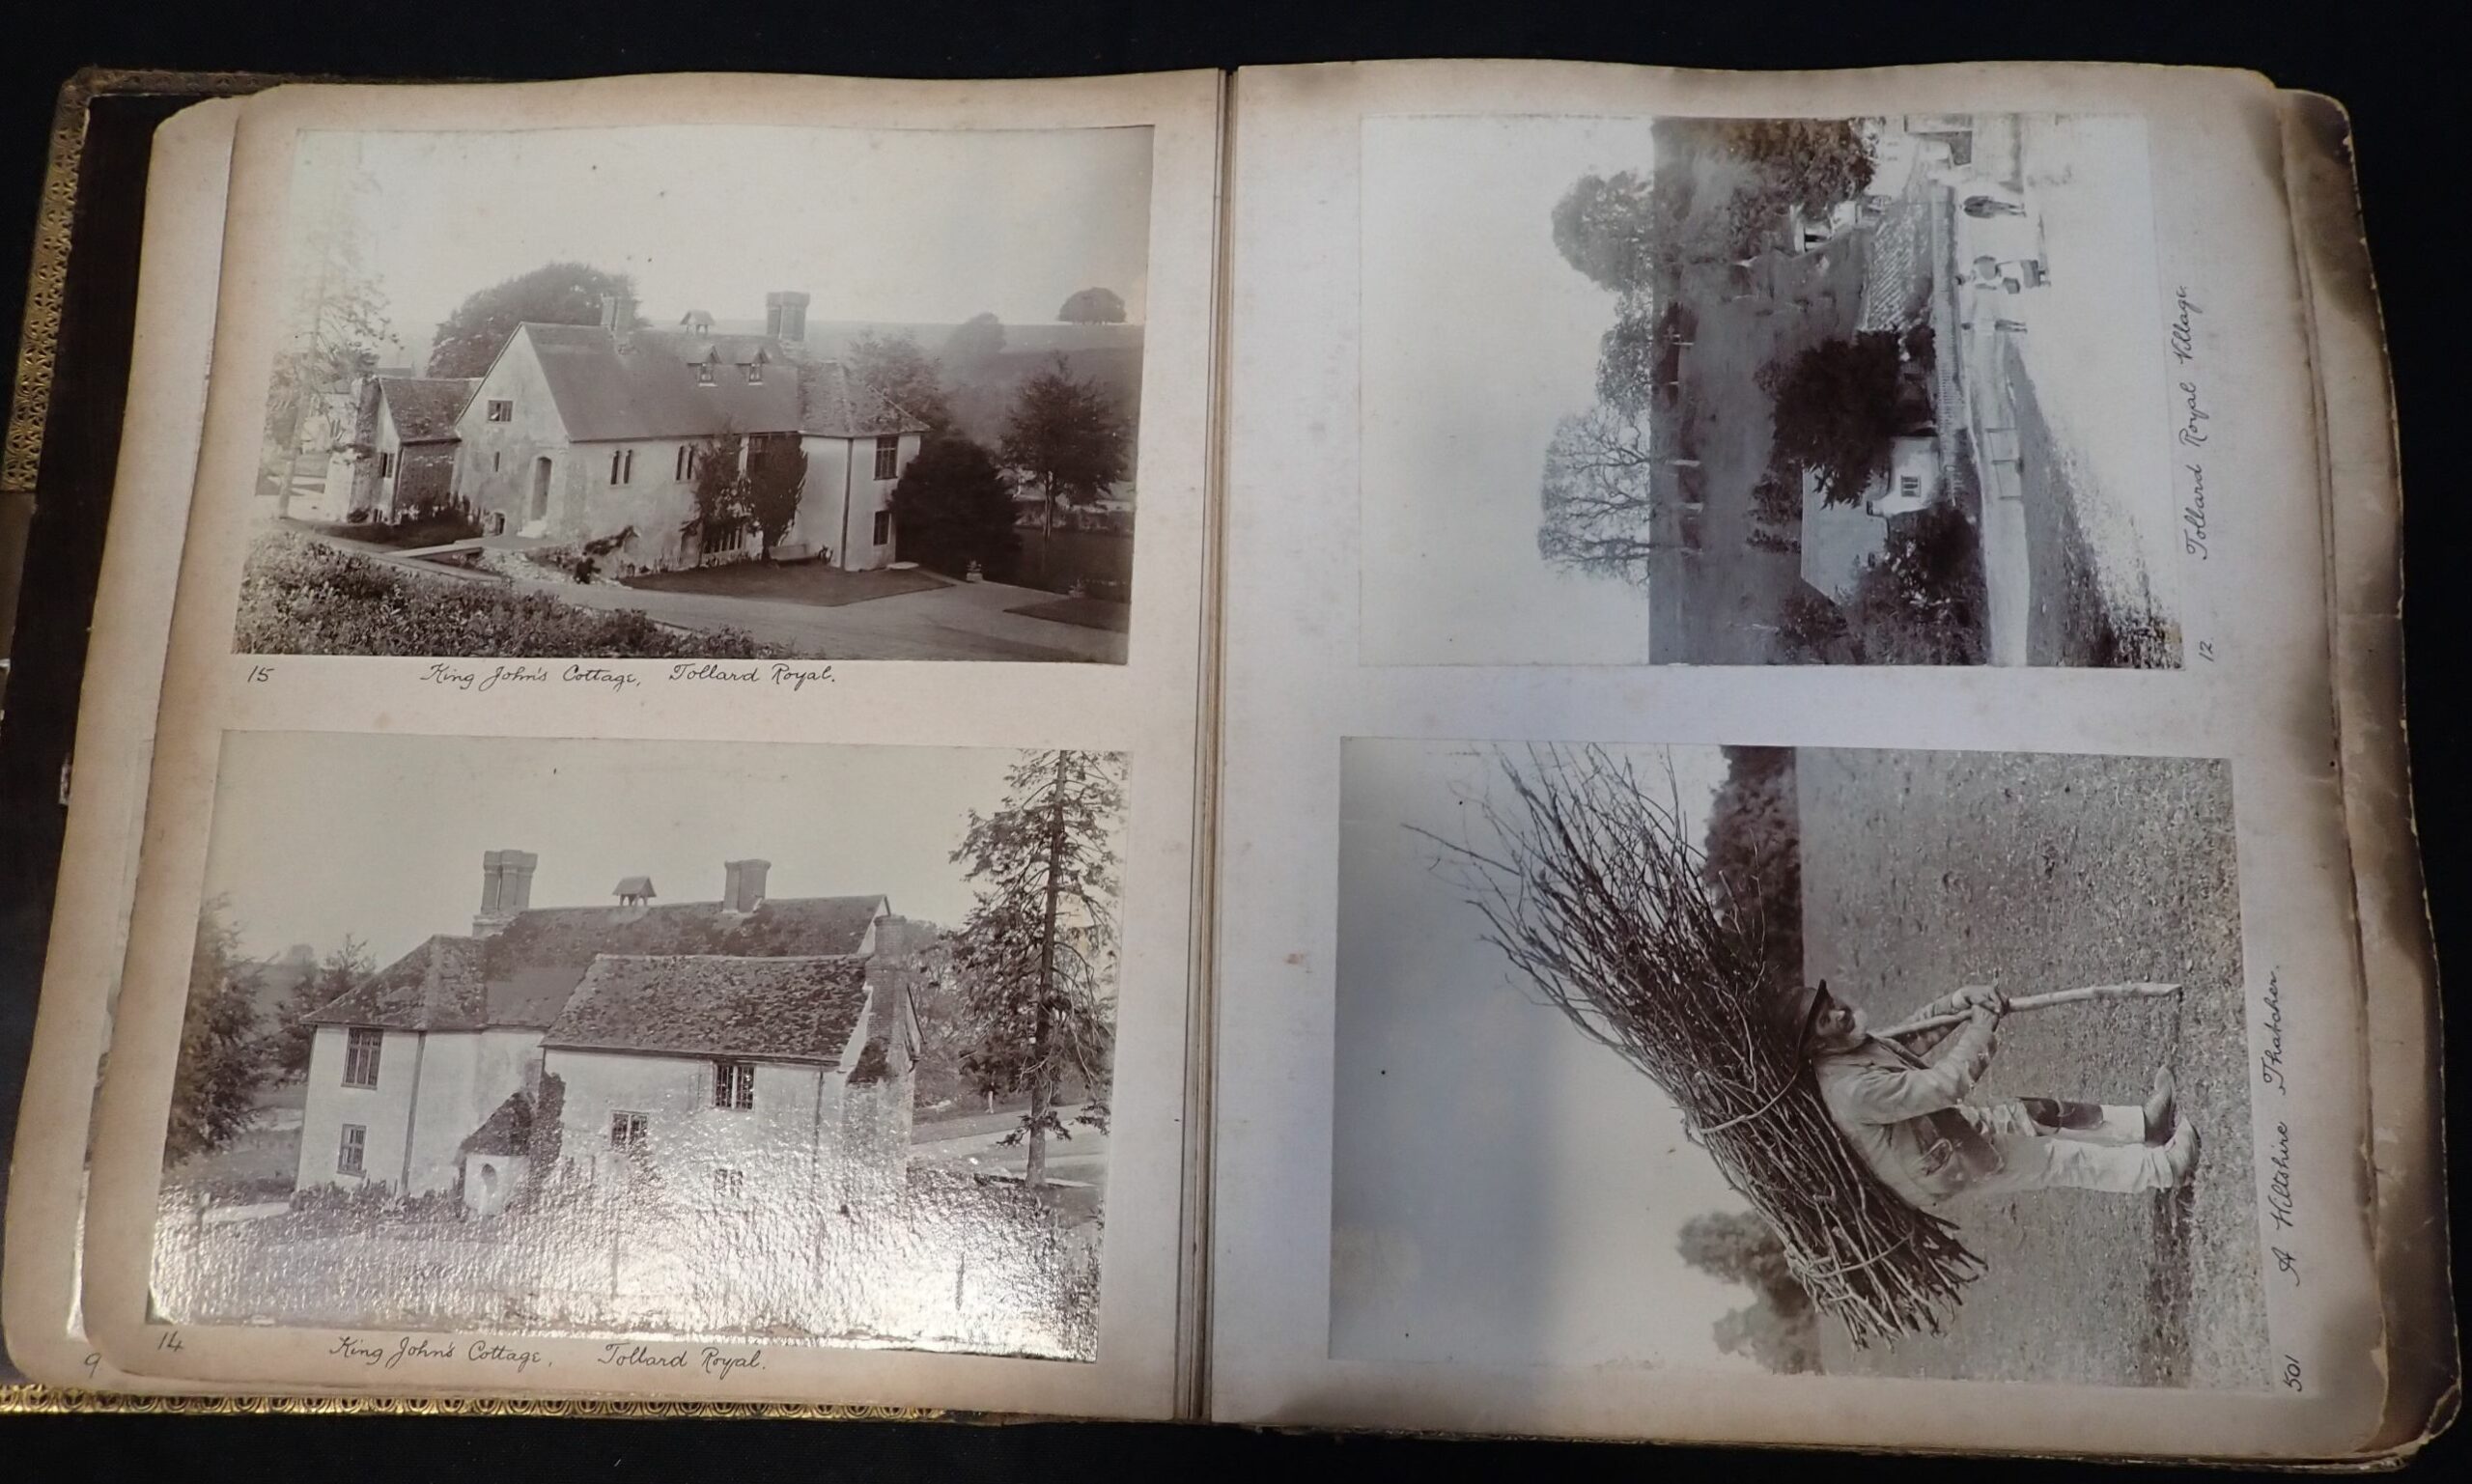 Inside pages of the dirty and smoke damaged Wiltshire Thatcher photo album. One of the four images shows a man bent over, using a stick and carrying a bundle of sticks. It is this image that was used on the Led Zeppelin IV Photo Album.